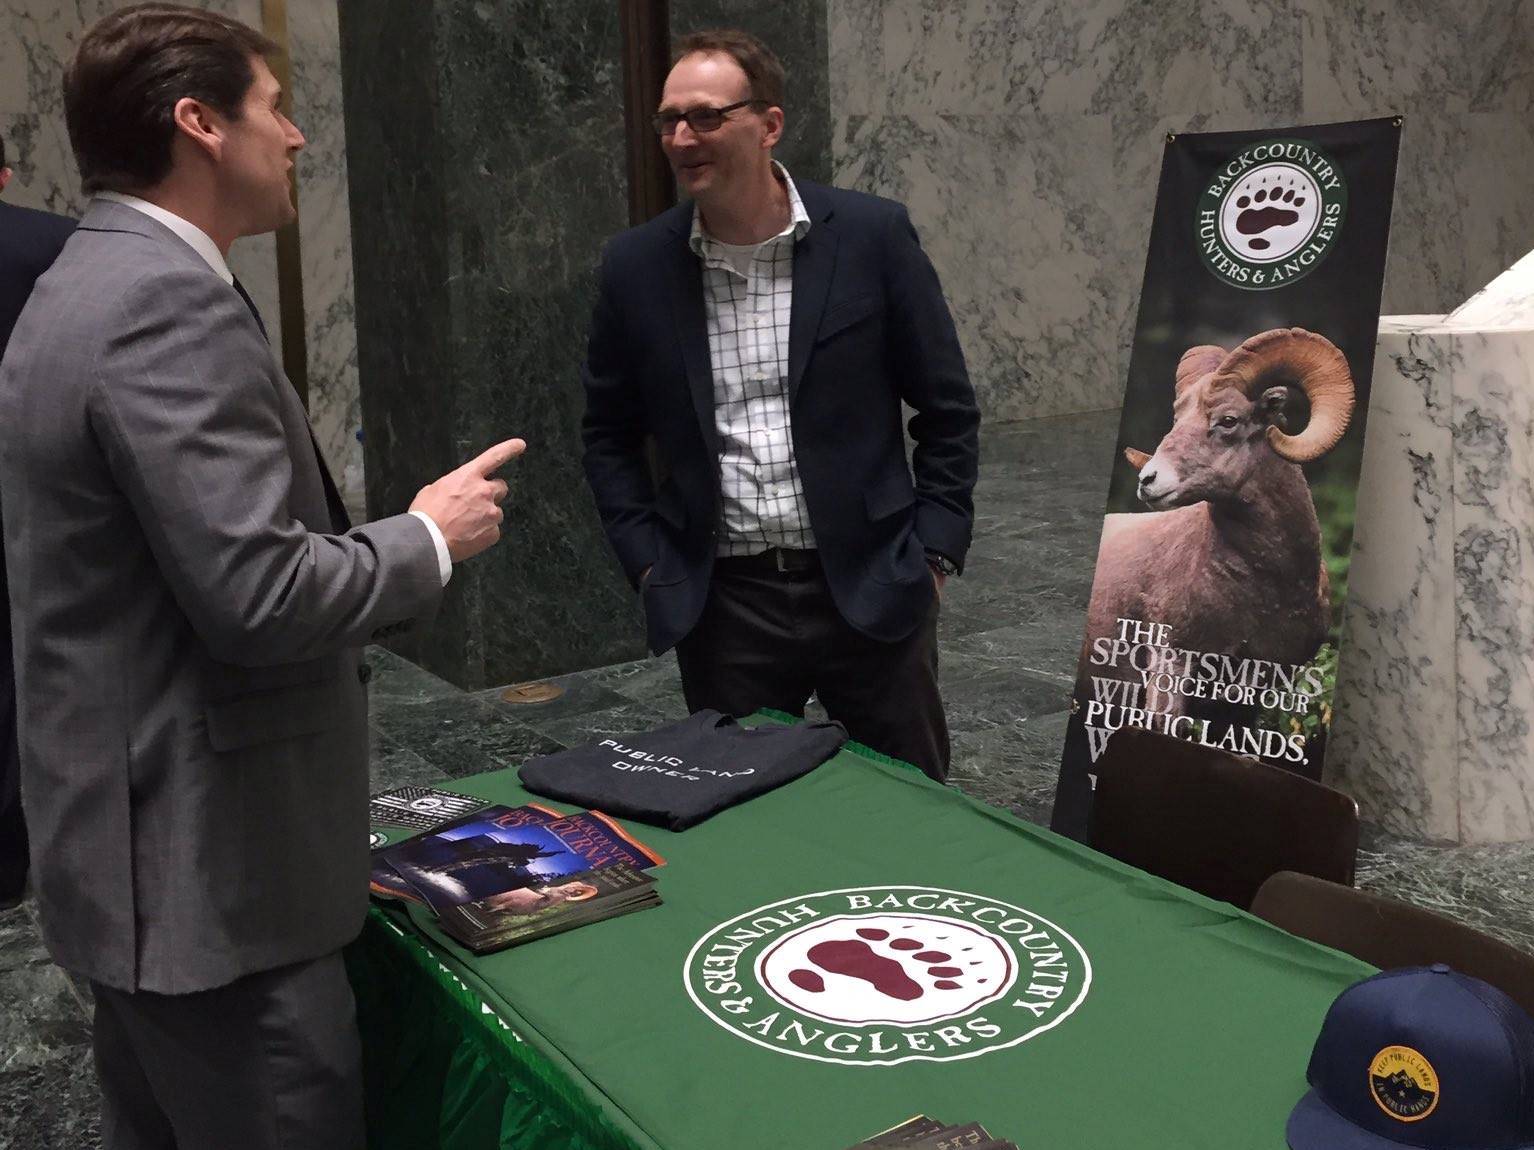 In March 2017, Assemblyman Jones learned more about the concerns of hunters, fishers and trappers in our state during the annual Sportsmen's Day in Albany.